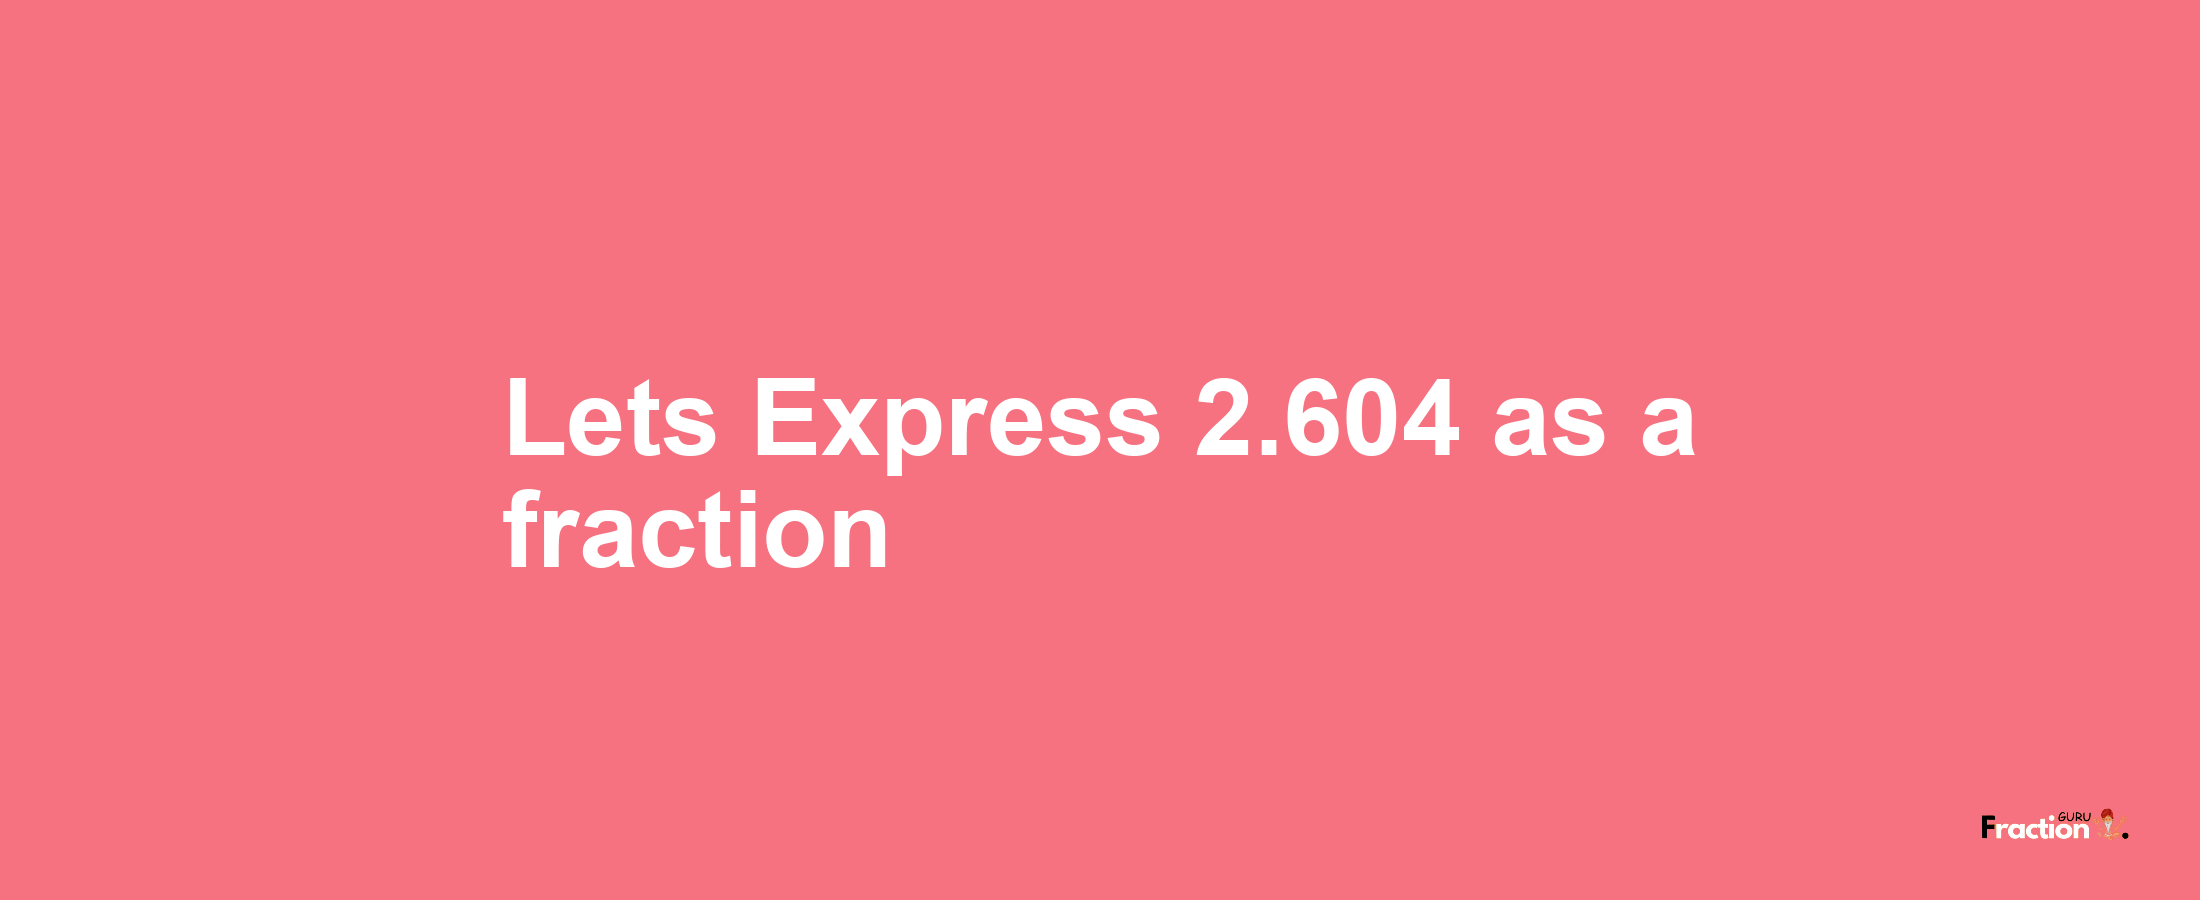 Lets Express 2.604 as afraction